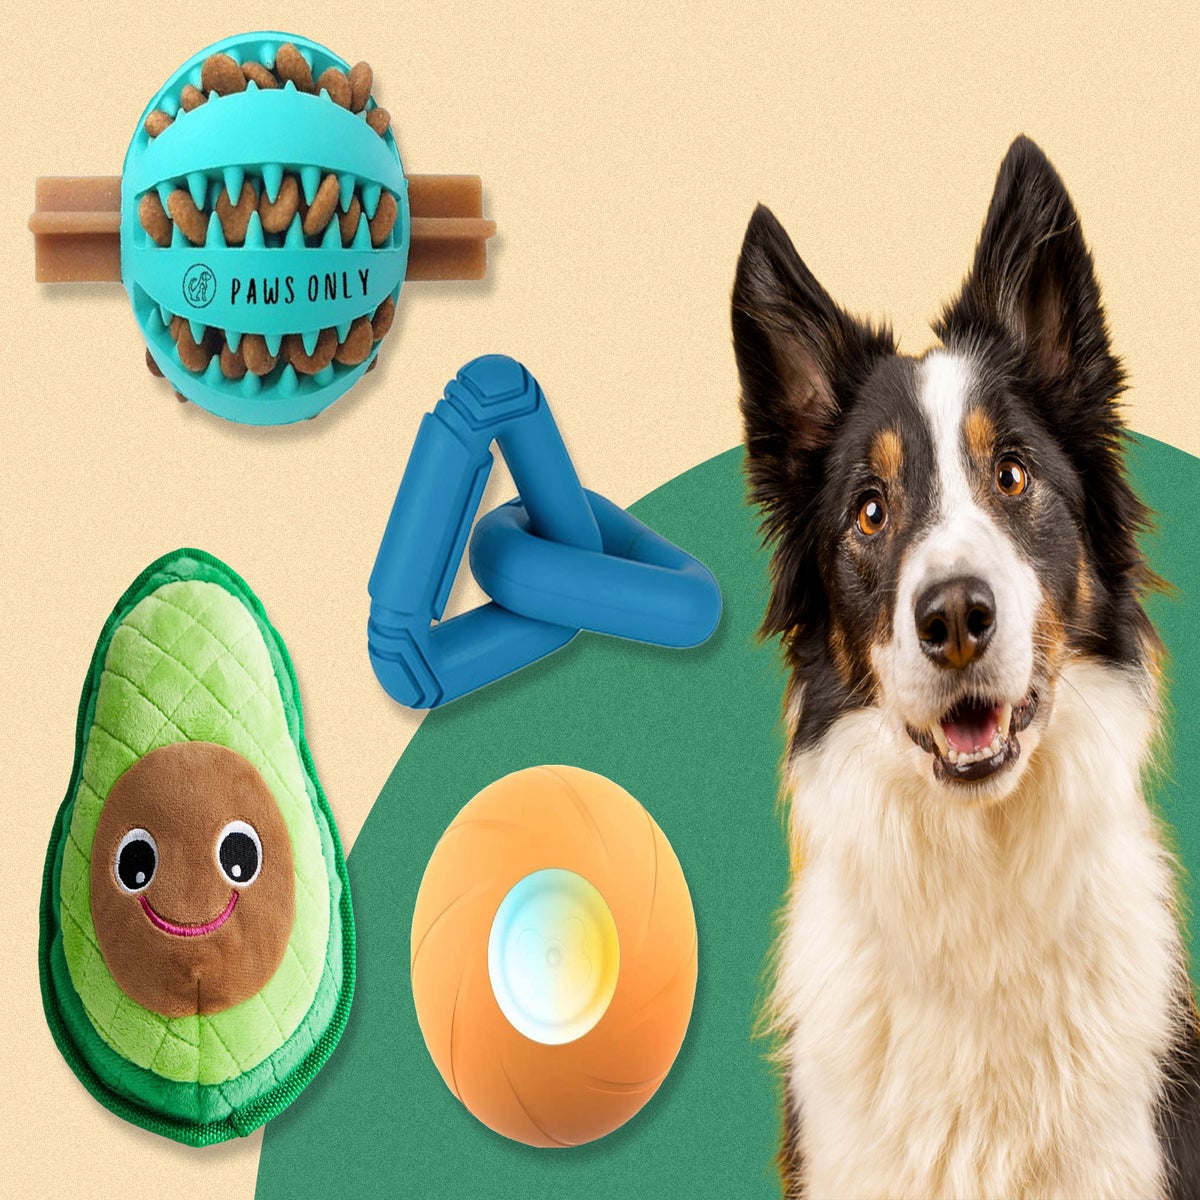 11 Gadgets for Dogs Home Alone: How to Keep Pups Busy